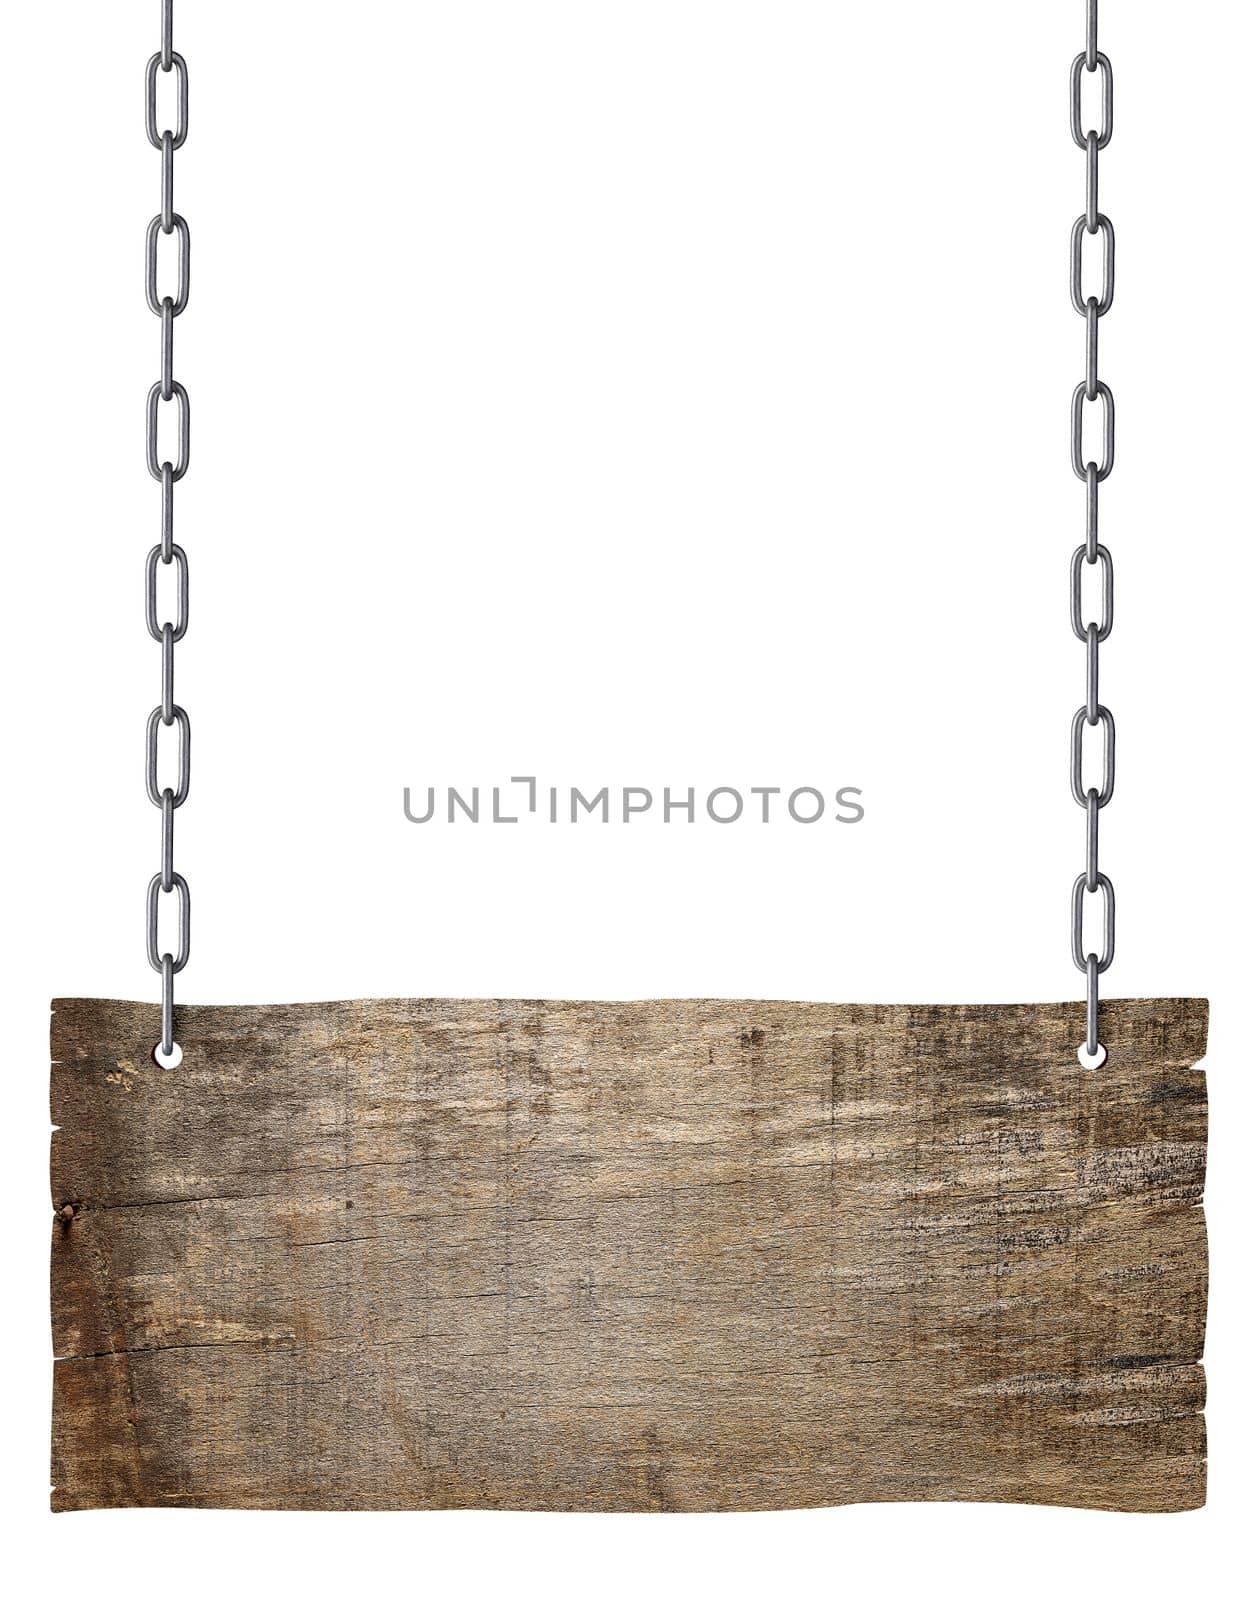 wooden sign chain ropesignboard signpost by Picsfive